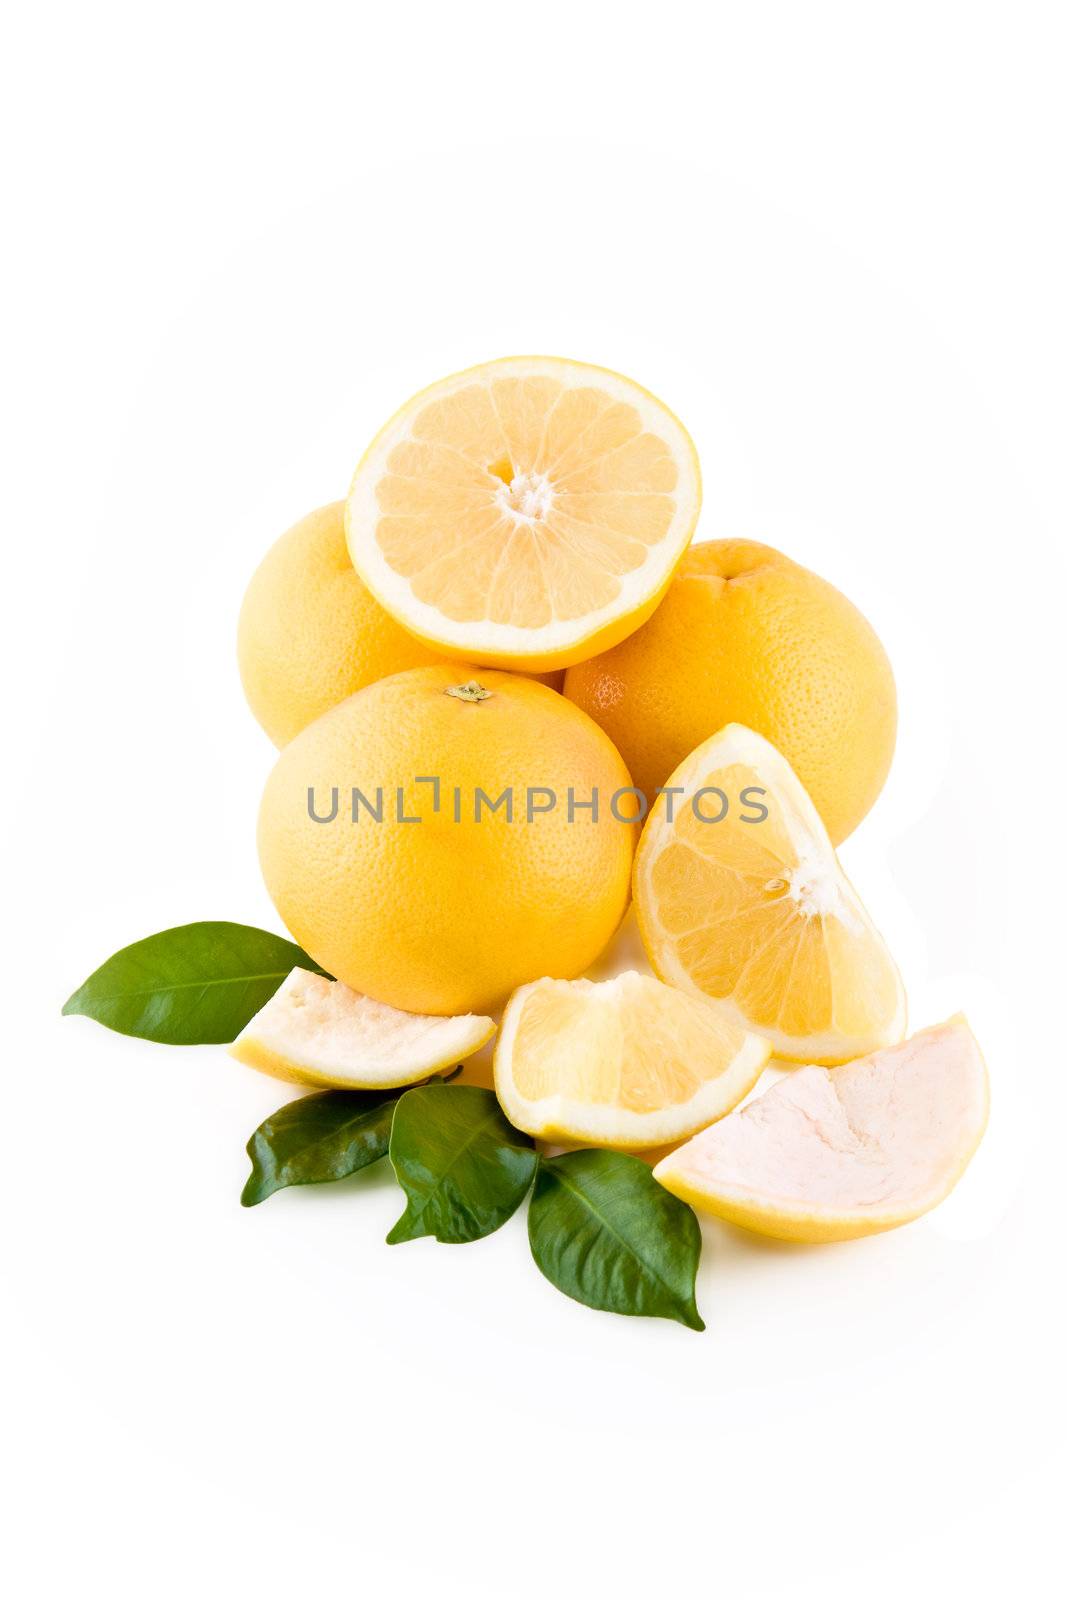 Juicy white grapefruits in stack isolated on white background